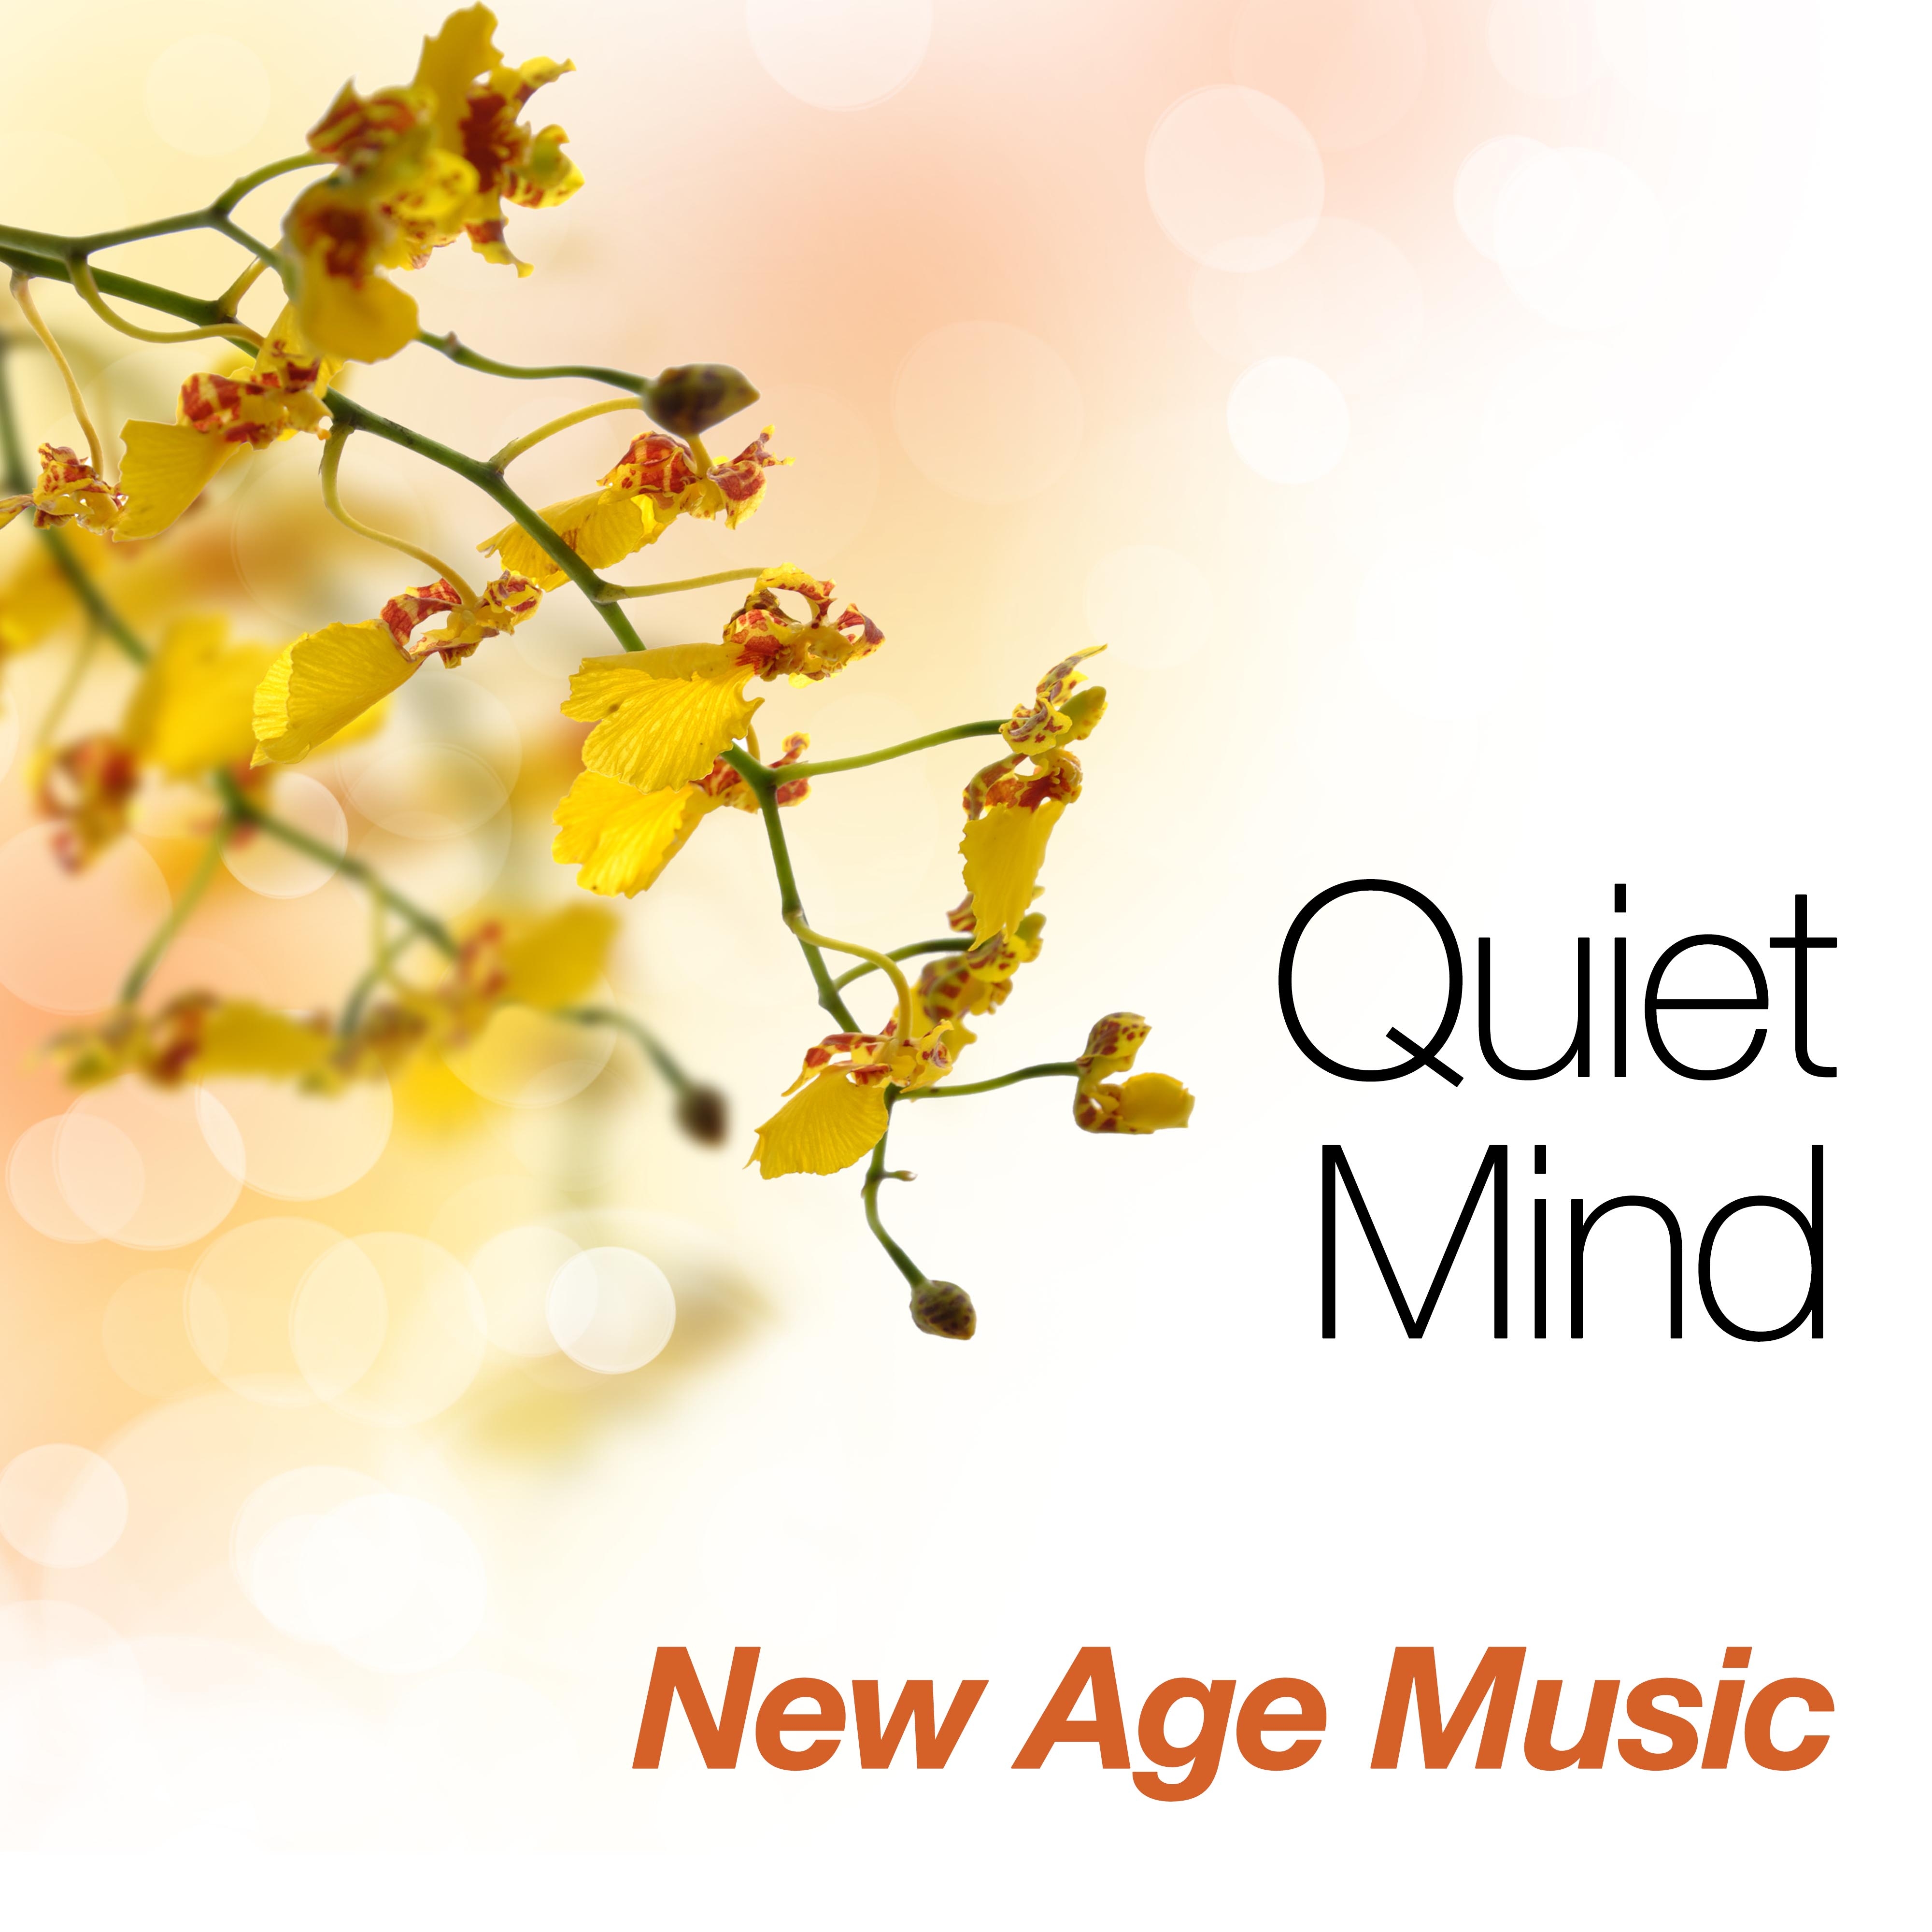 Quiet Mind: New Age Music for Tai Chi, Qigong, Reiki and Yoga for your Inner Peace with Special Sounds of Nature like Rain and Ocean Waves